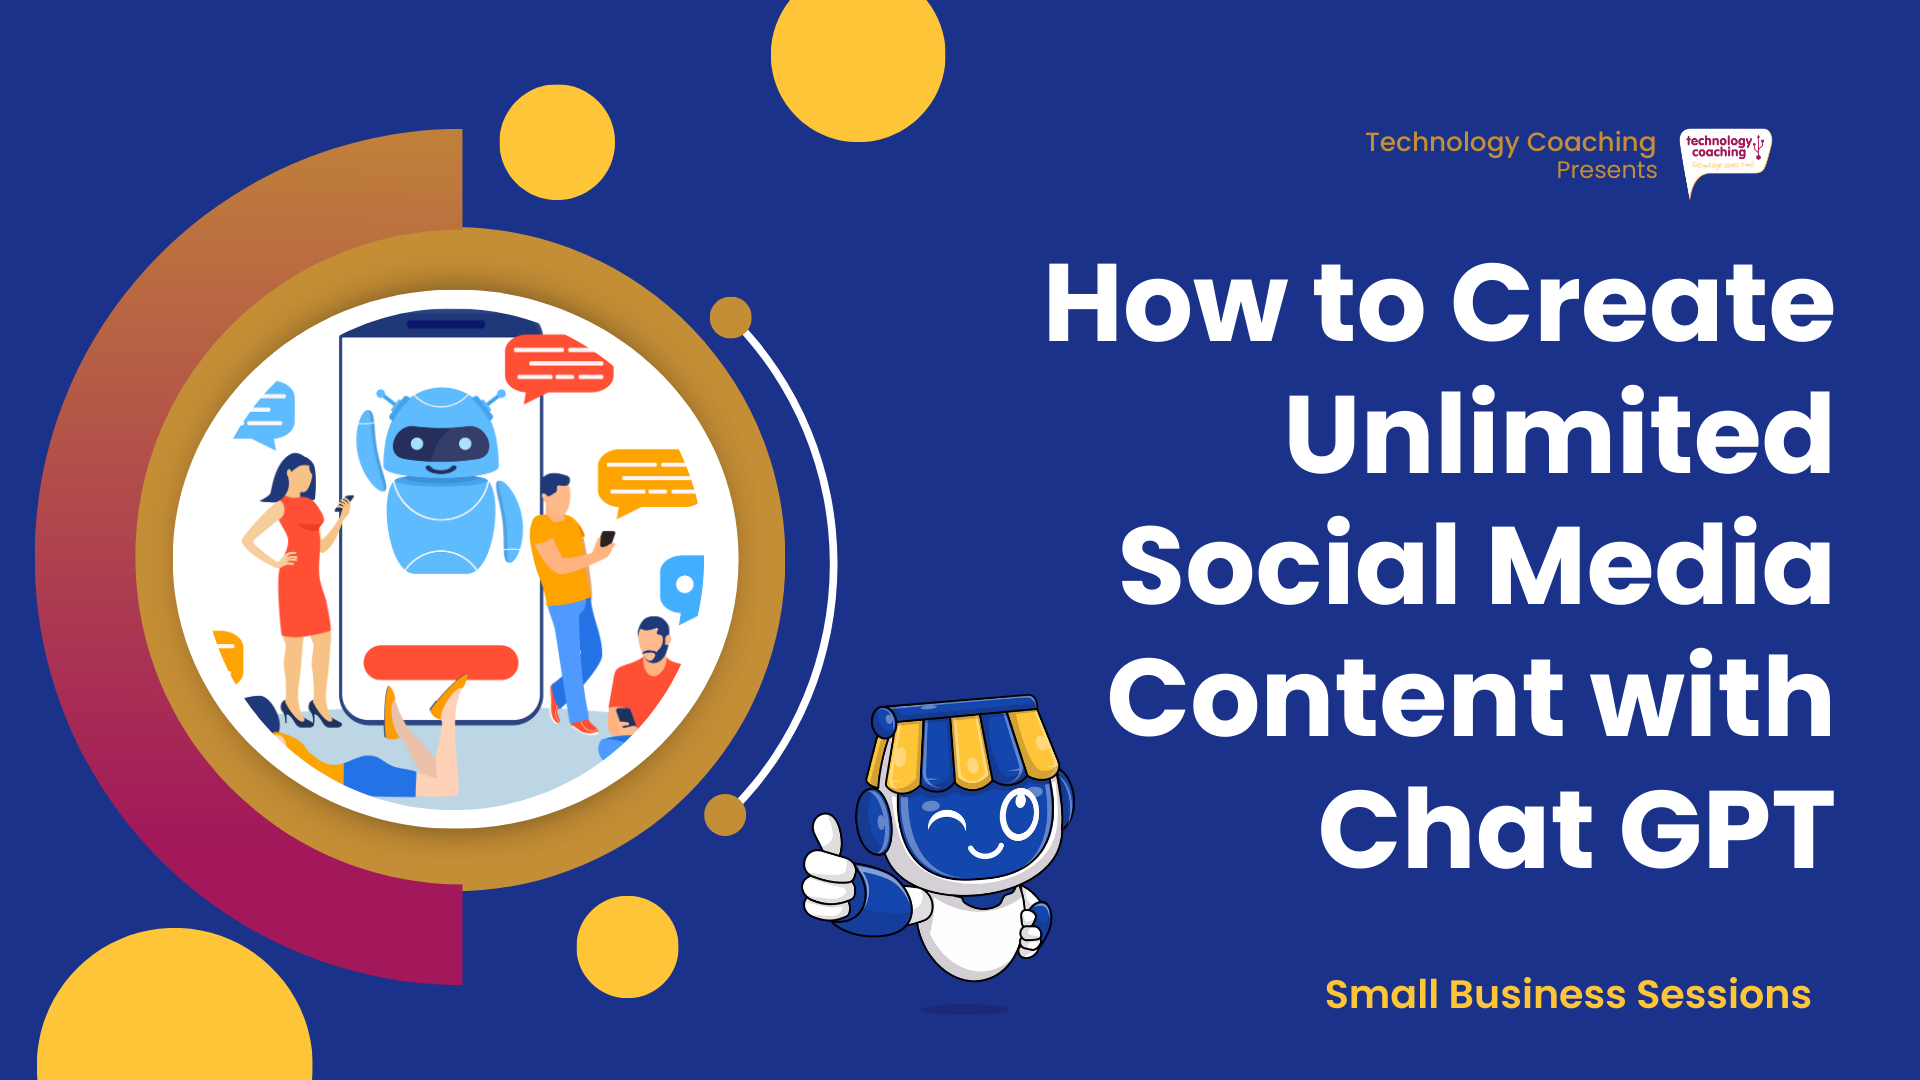 Technology Coachings Small Business Sessions. How to create unlimited social media content with chatgpt.